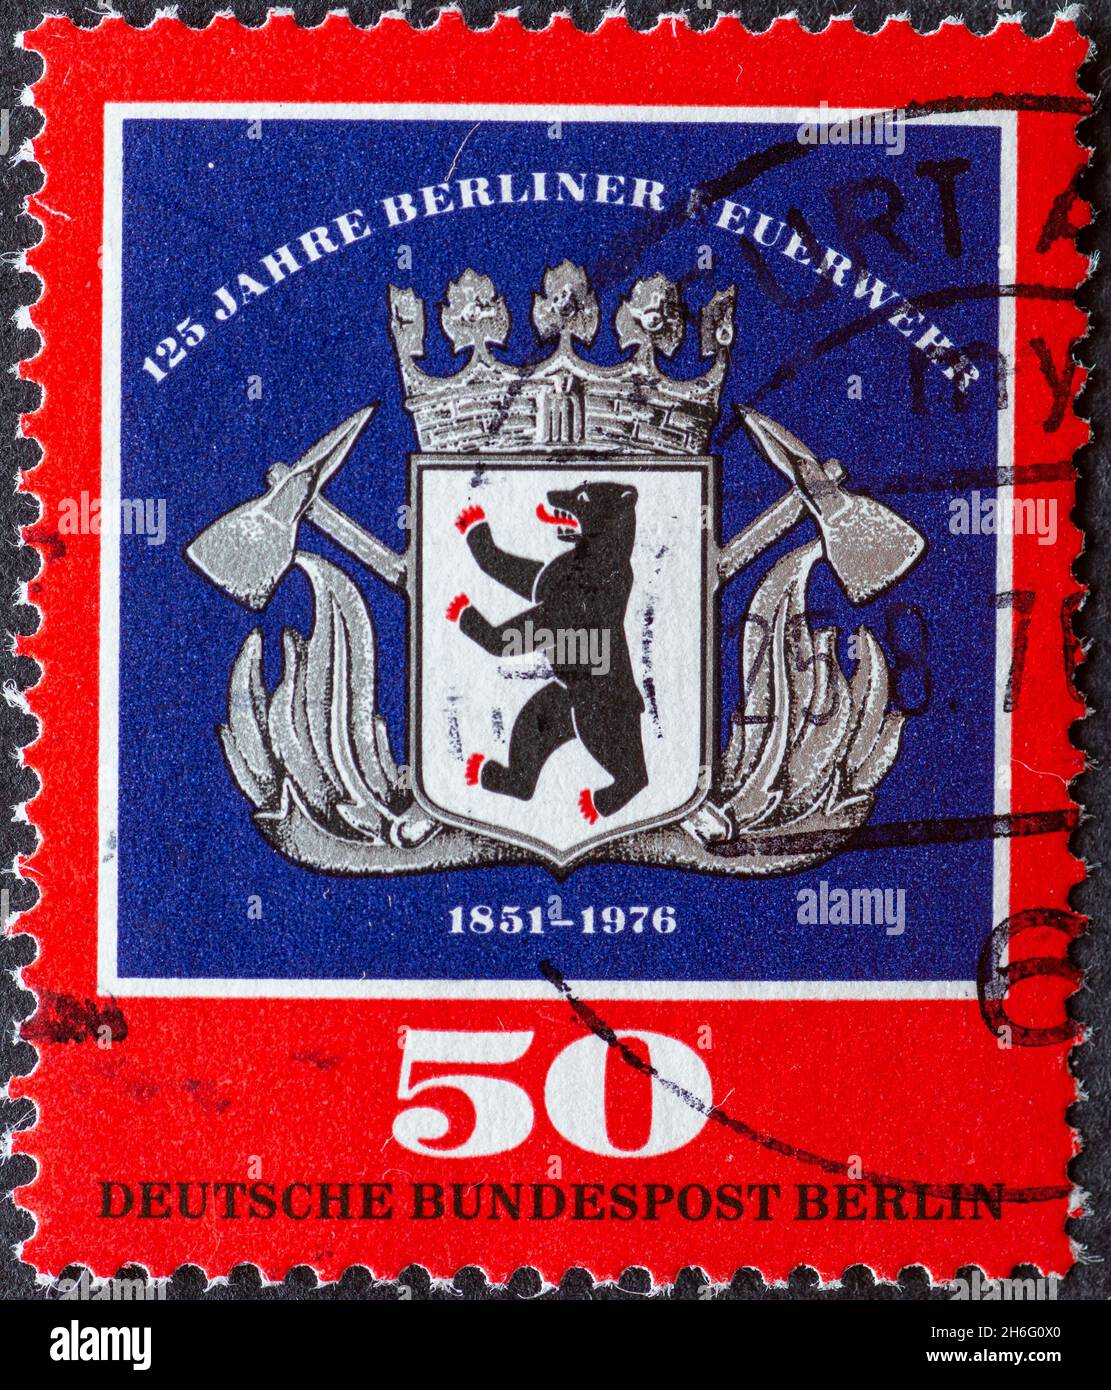 GERMANY, Berlin - CIRCA 1976: a postage stamp from Germany, Berlin showing the Coat of arms of the Berlin fire department with Berlin bear and crossed Stock Photo